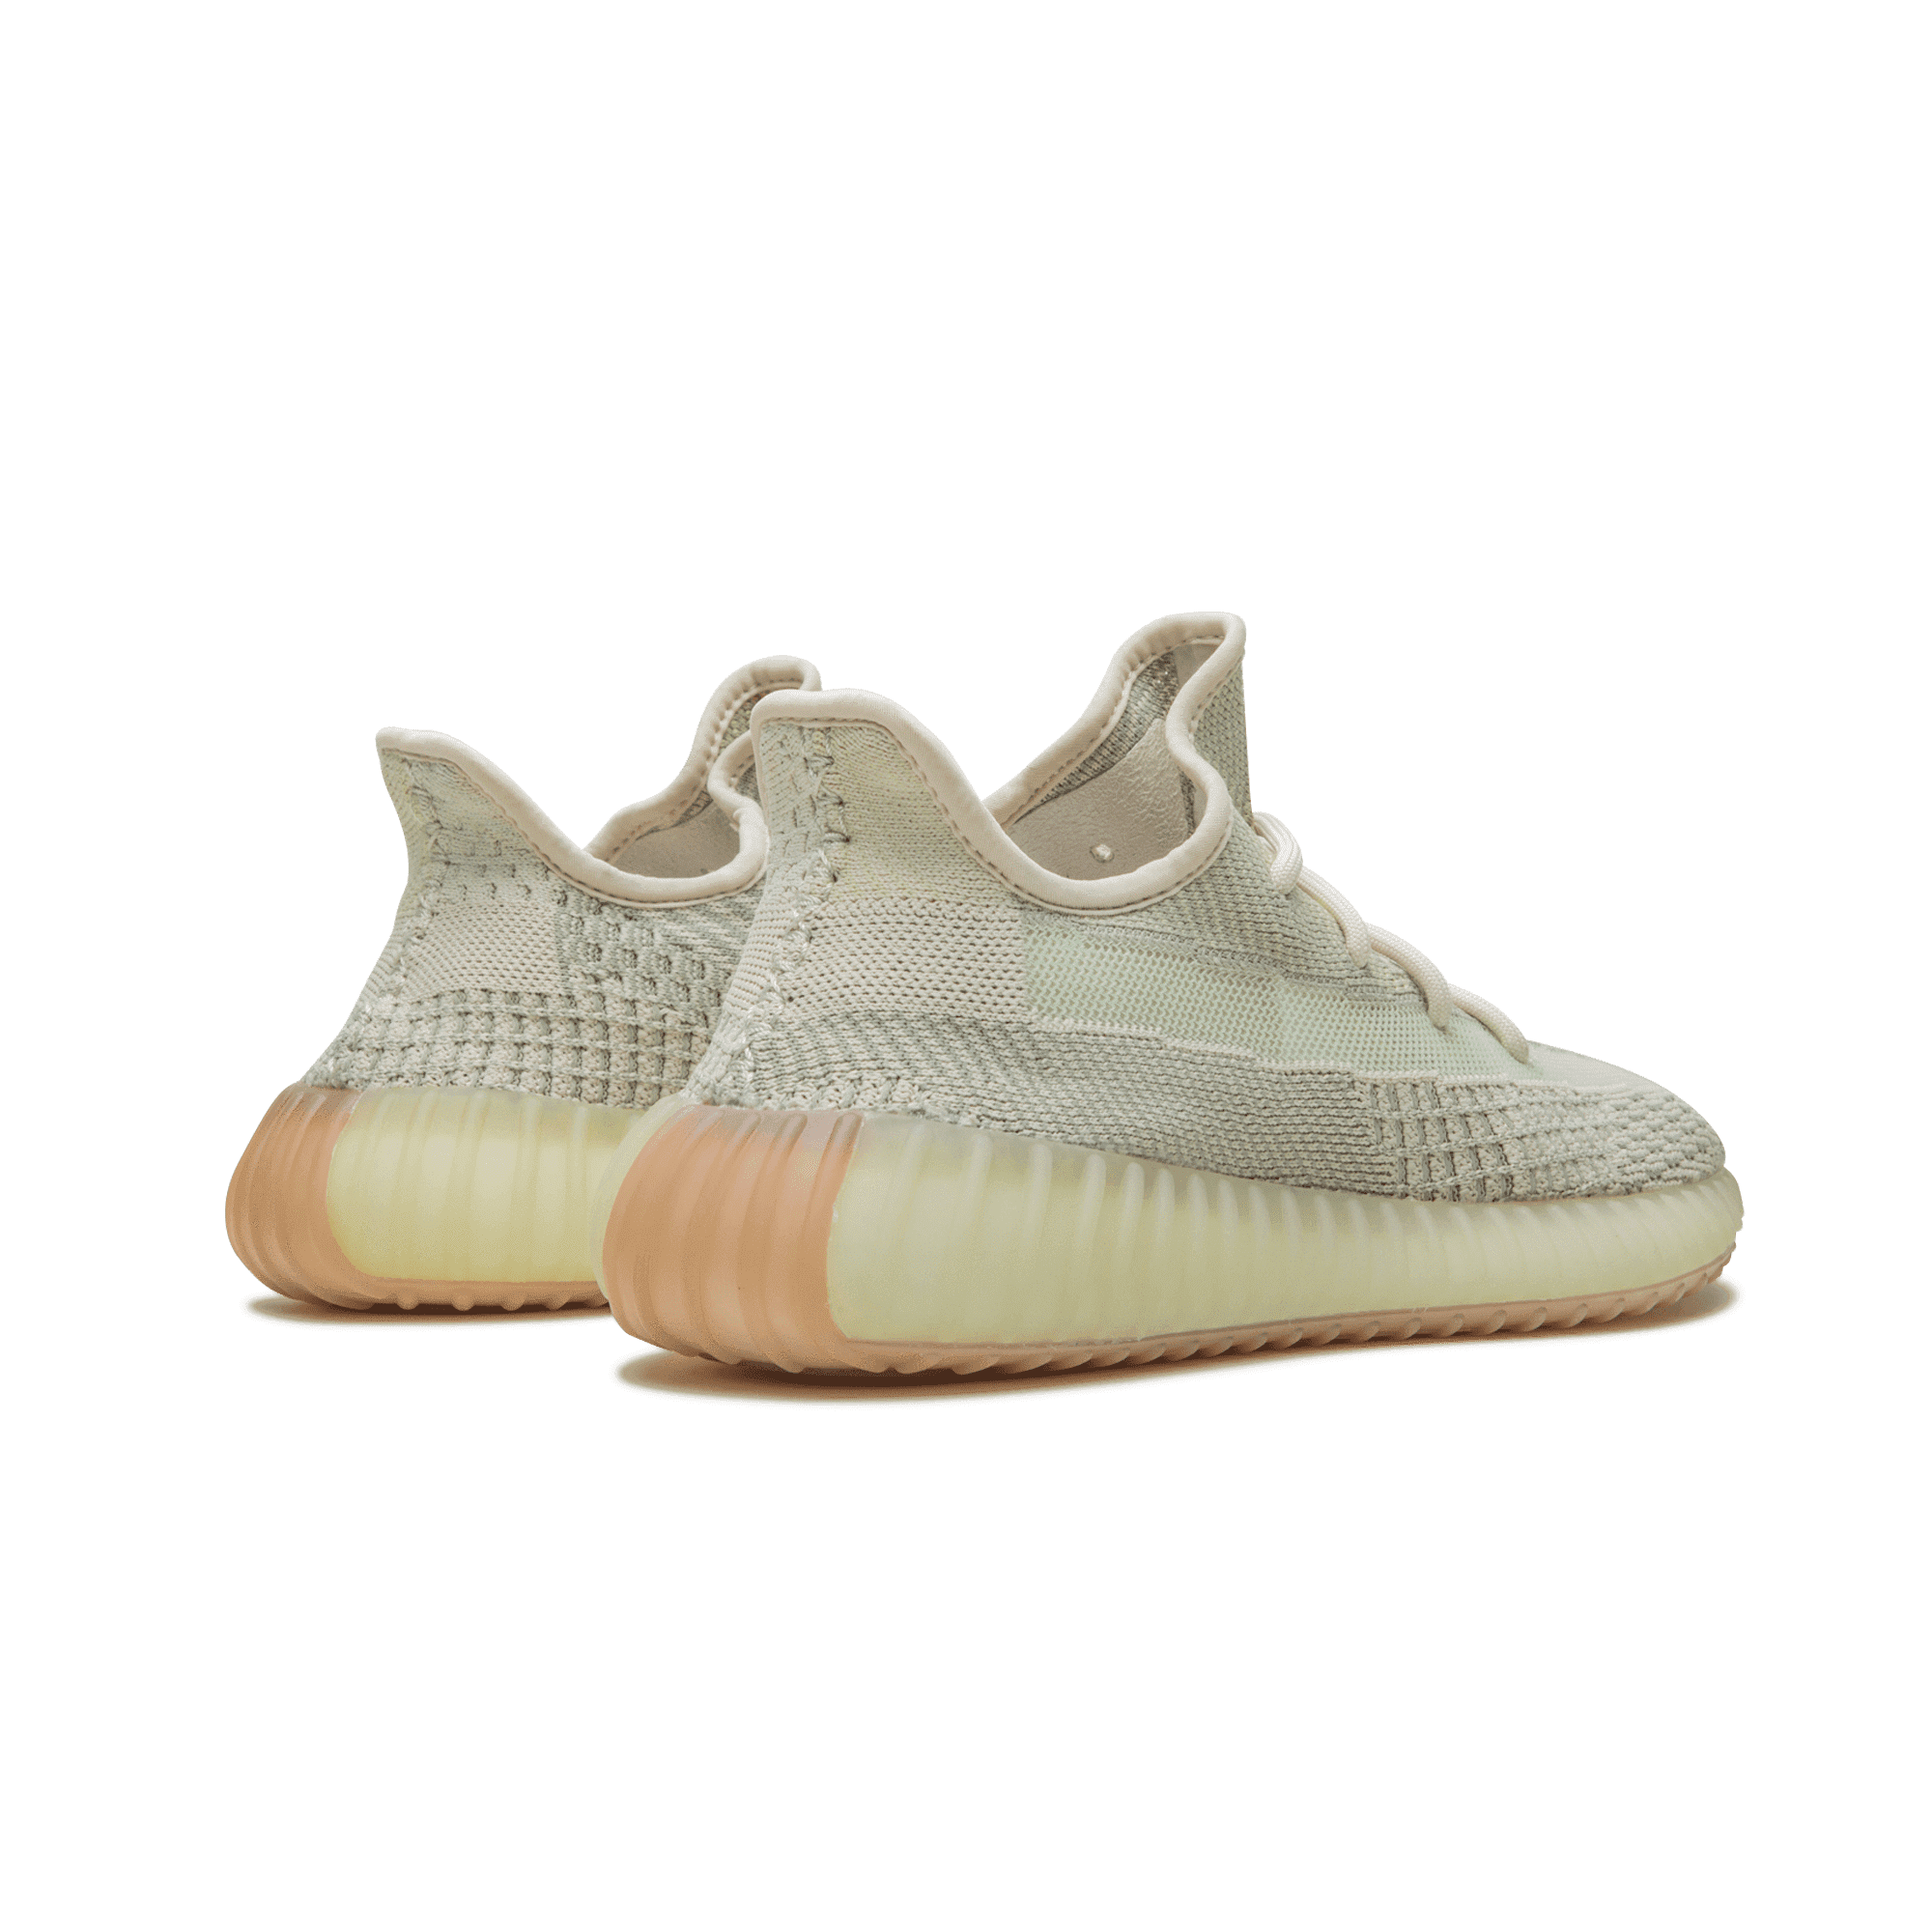 Yeezy Boost 350 V2  “Citrin” - Manore Store